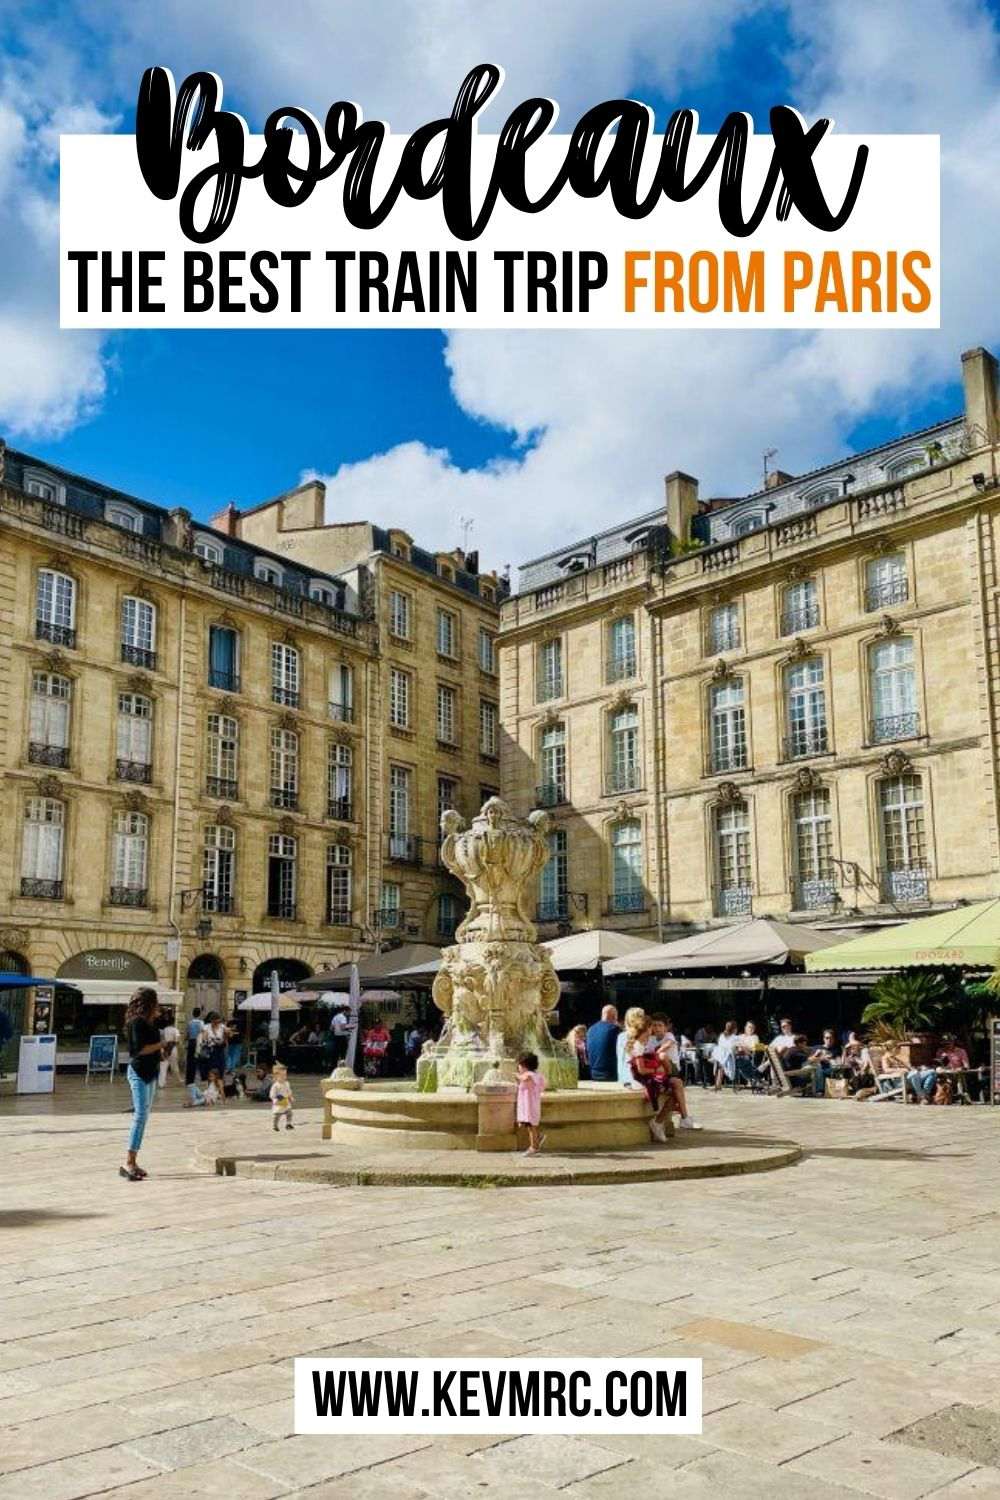 Wondering if you could go on a Bordeaux day trip from Paris? Well, yes you can, and here is all the info and tips you need to make it happen. bordeaux travel guide | visit bordeaux